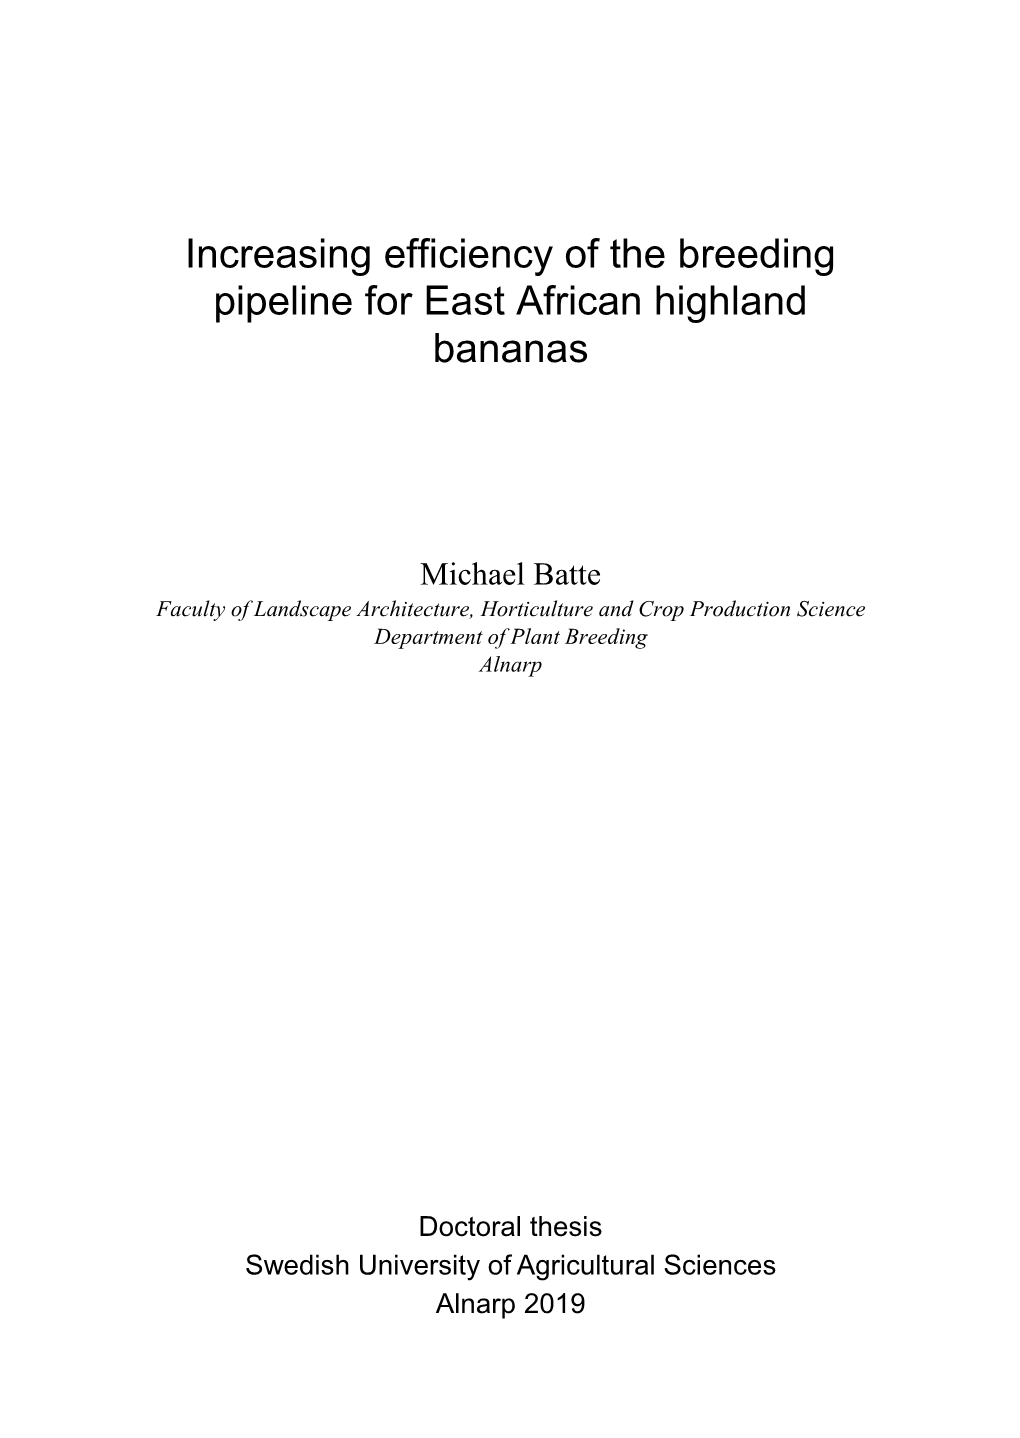 Increasing Efficiency of the Breeding Pipeline for East African Highland Bananas